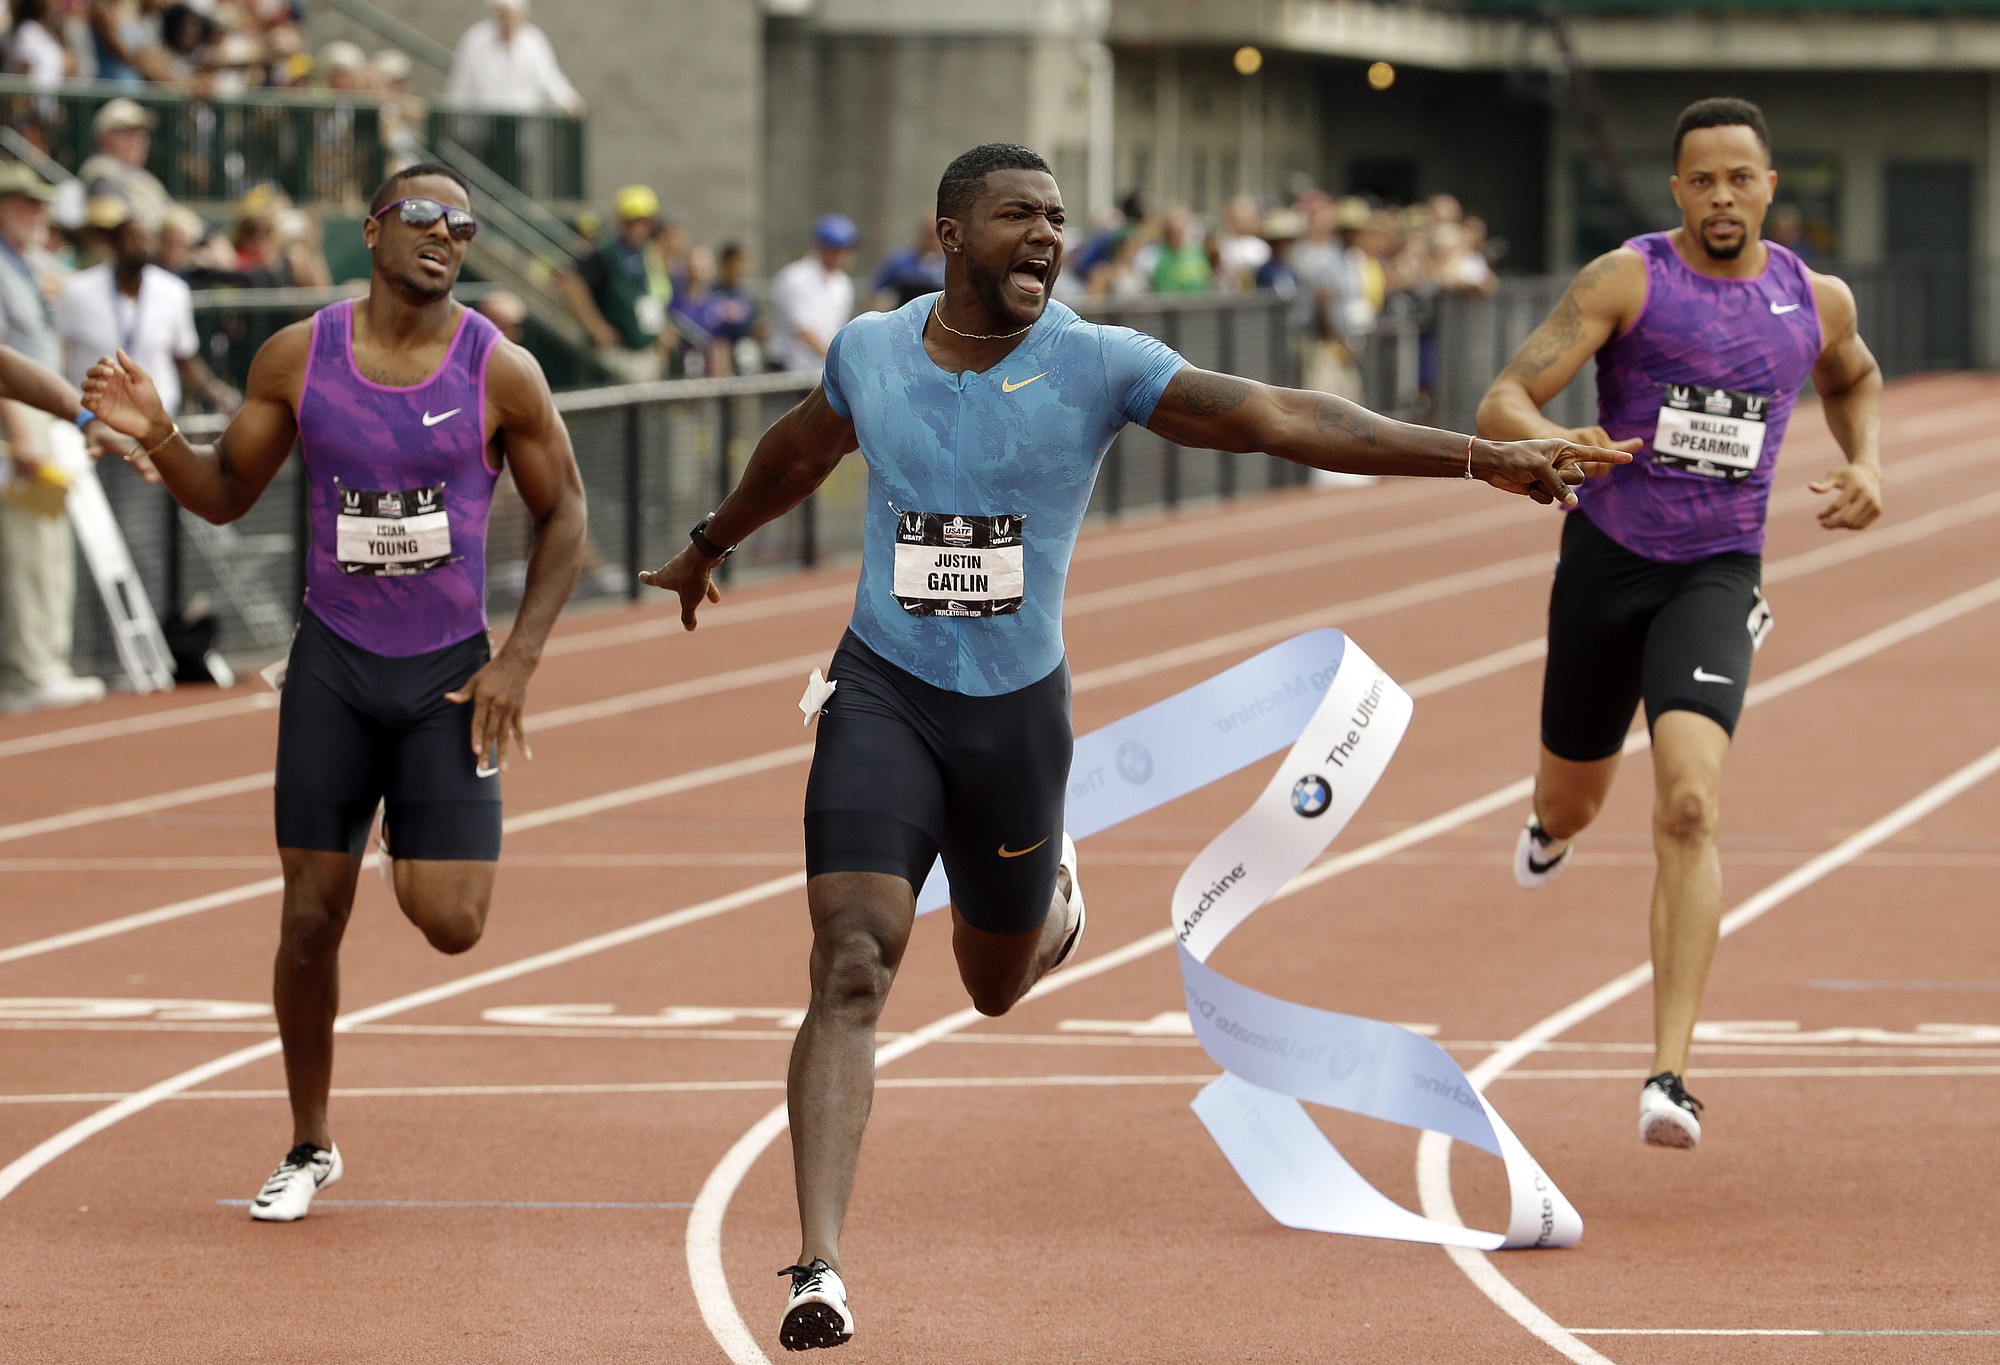 Justin Gatlin, center, wins the 200-meter ahead of Isiah Young, left, and Wallace Spearmon at the U.S. Track and Field Championships in Eugene, Ore., Sunday, June 28, 2015. Young finished second and Spearmon took third.